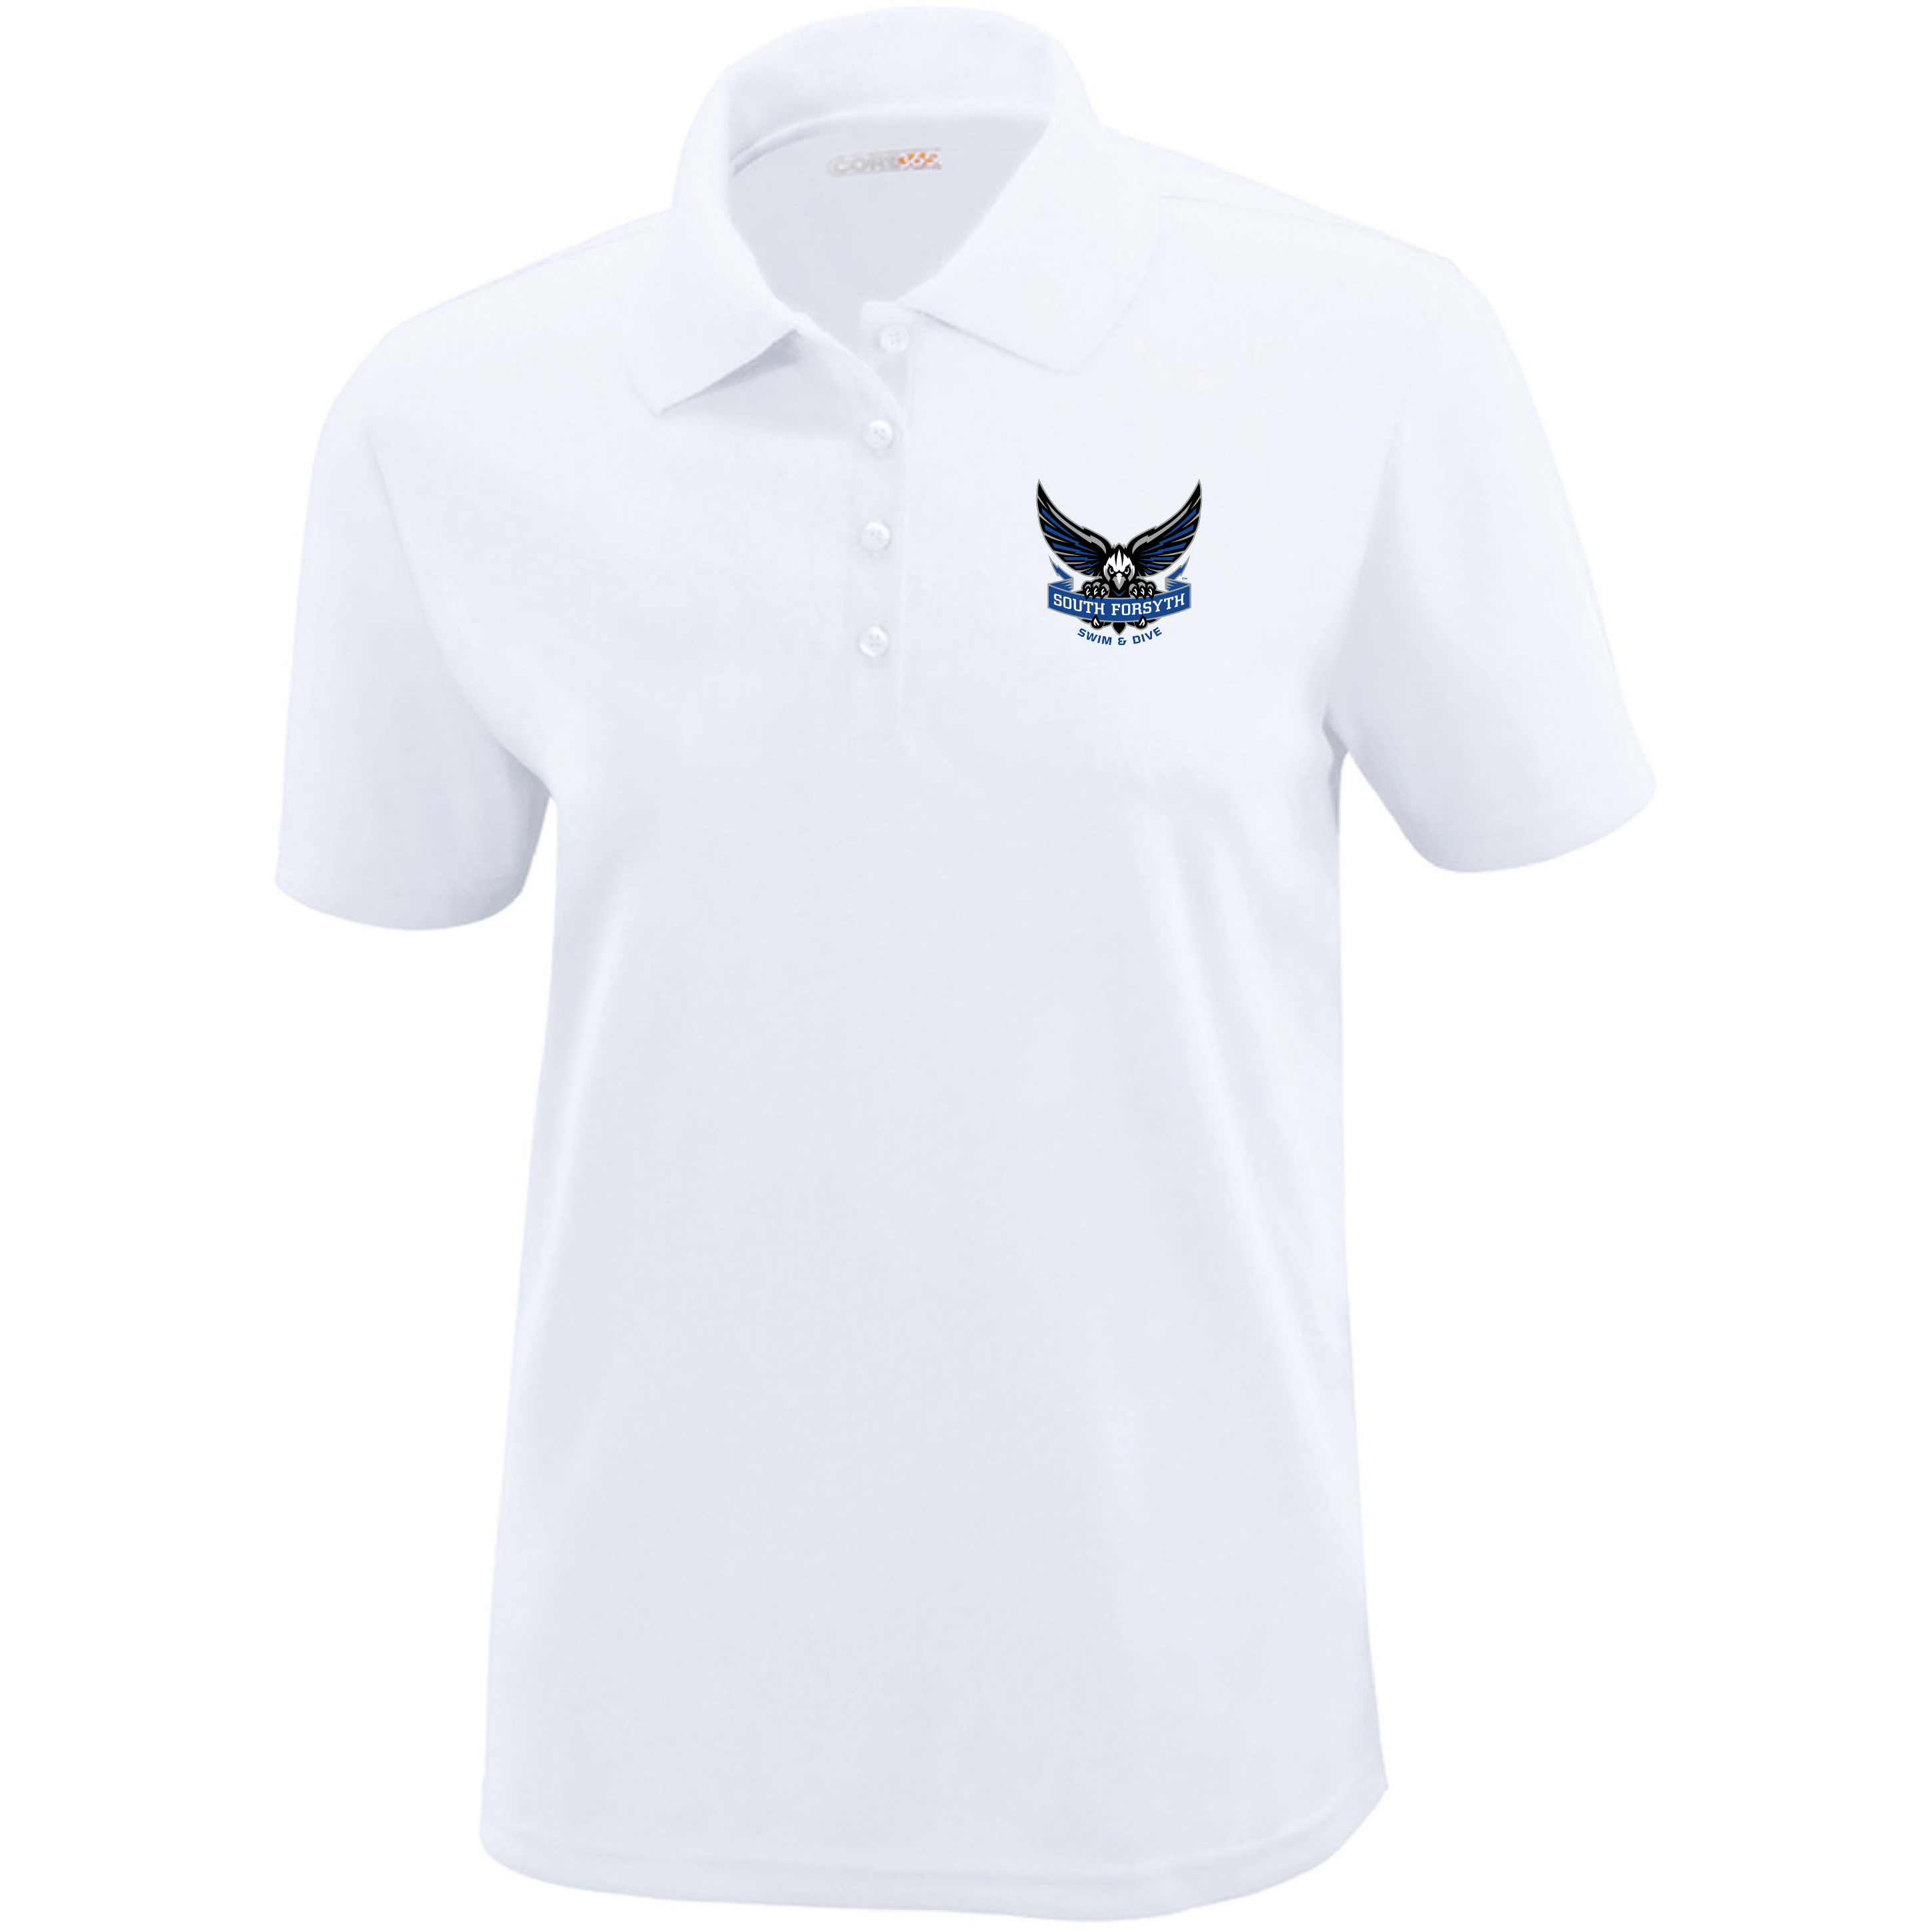 Dri-Fit Women's Polo (Customized) - South Forsyth